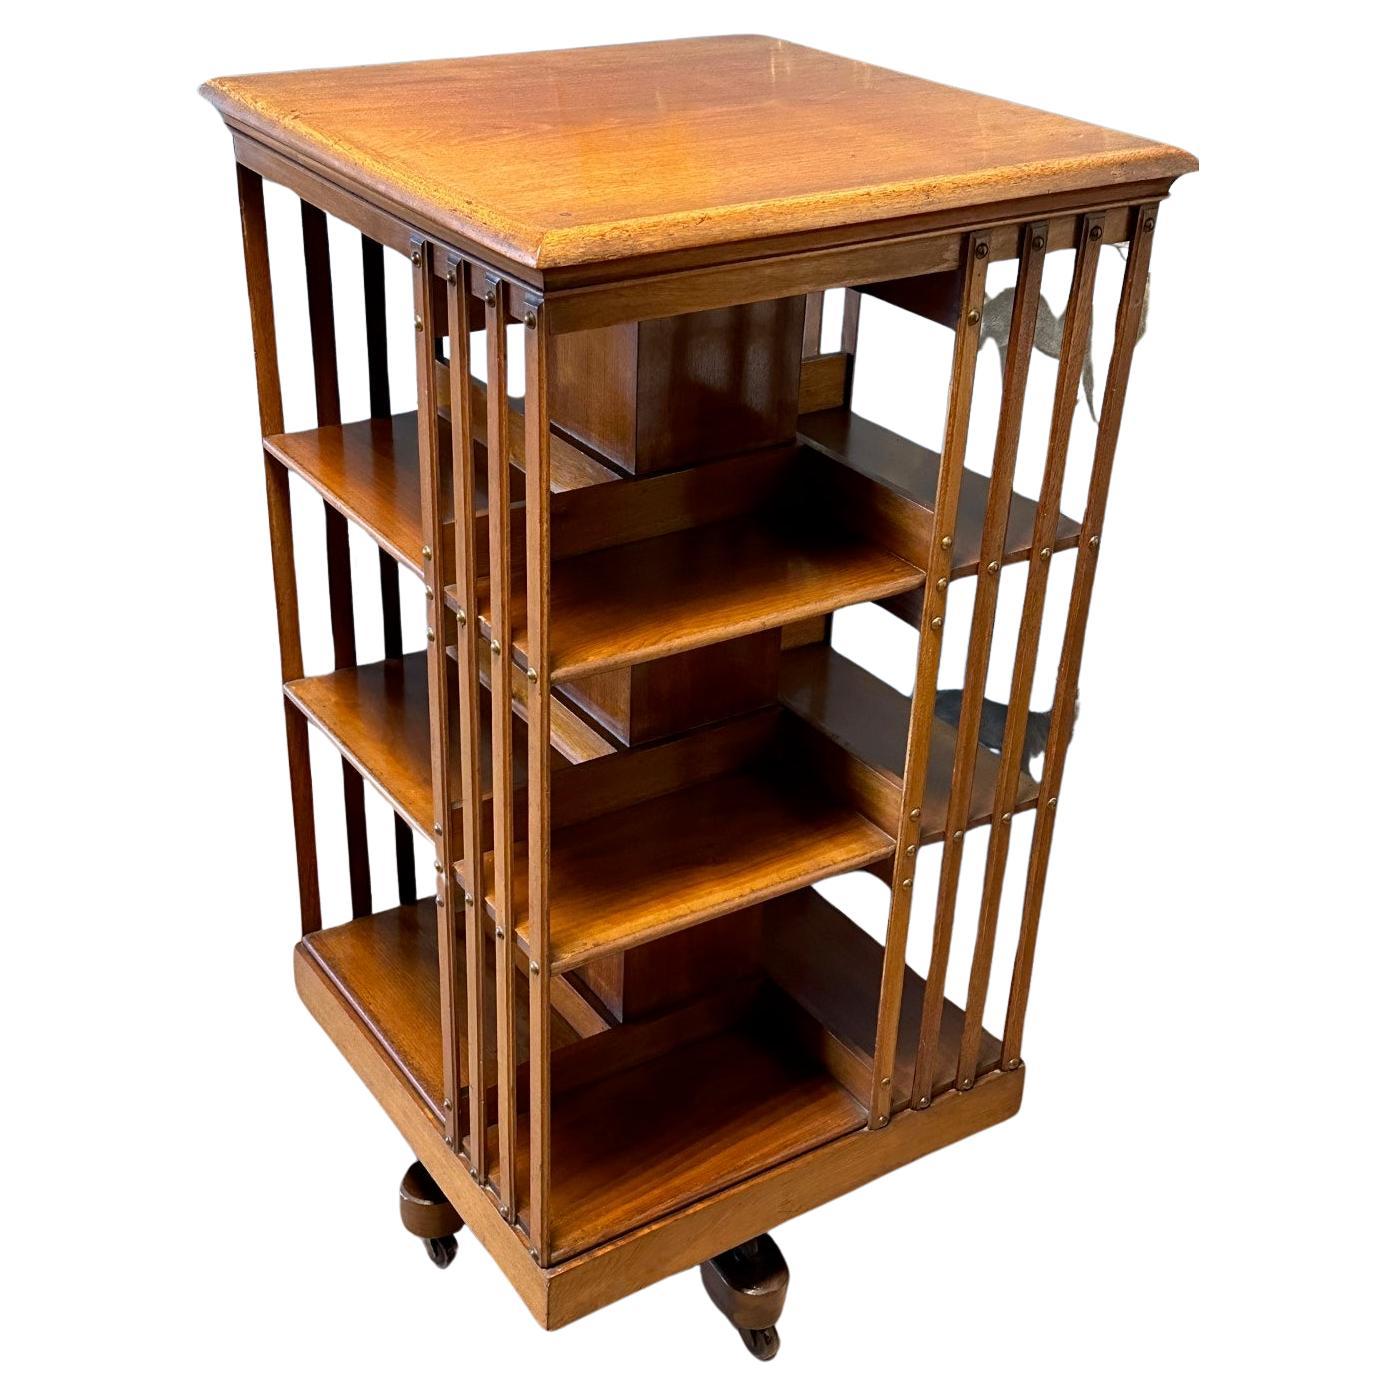 Large revolving Bookcase from Maple & Co , London 